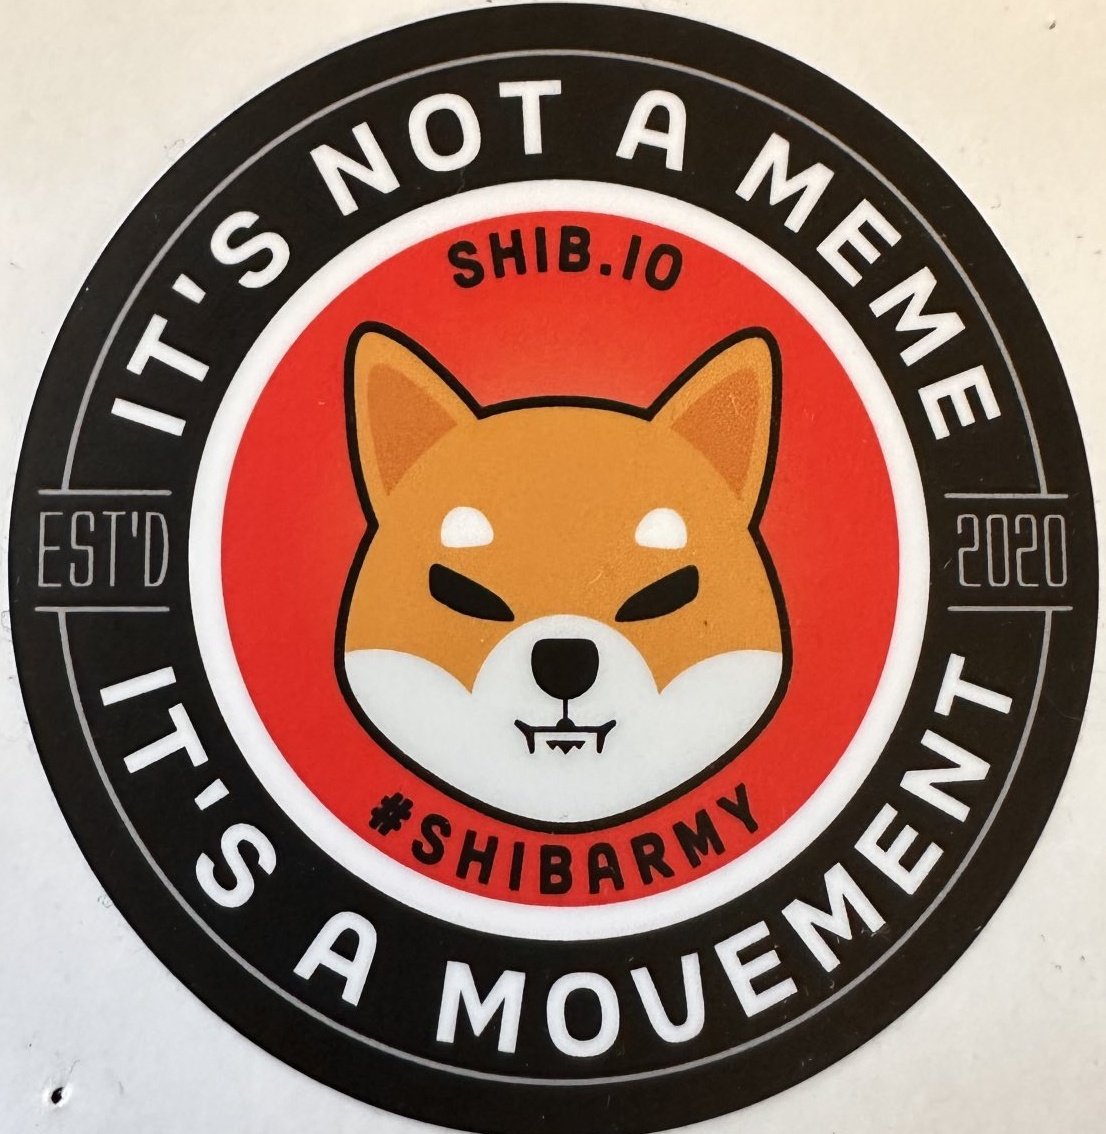 Dear #SHIBARMY less than hour left for huge announcements!!!
Make some noise, show them all we are a very big and proud family!!!
#ShibariumBETA #Shibarium #ShibTheMetaverse #SHIBARMYSTRONG #SHIBARMY #shib #bone #leash #crypto